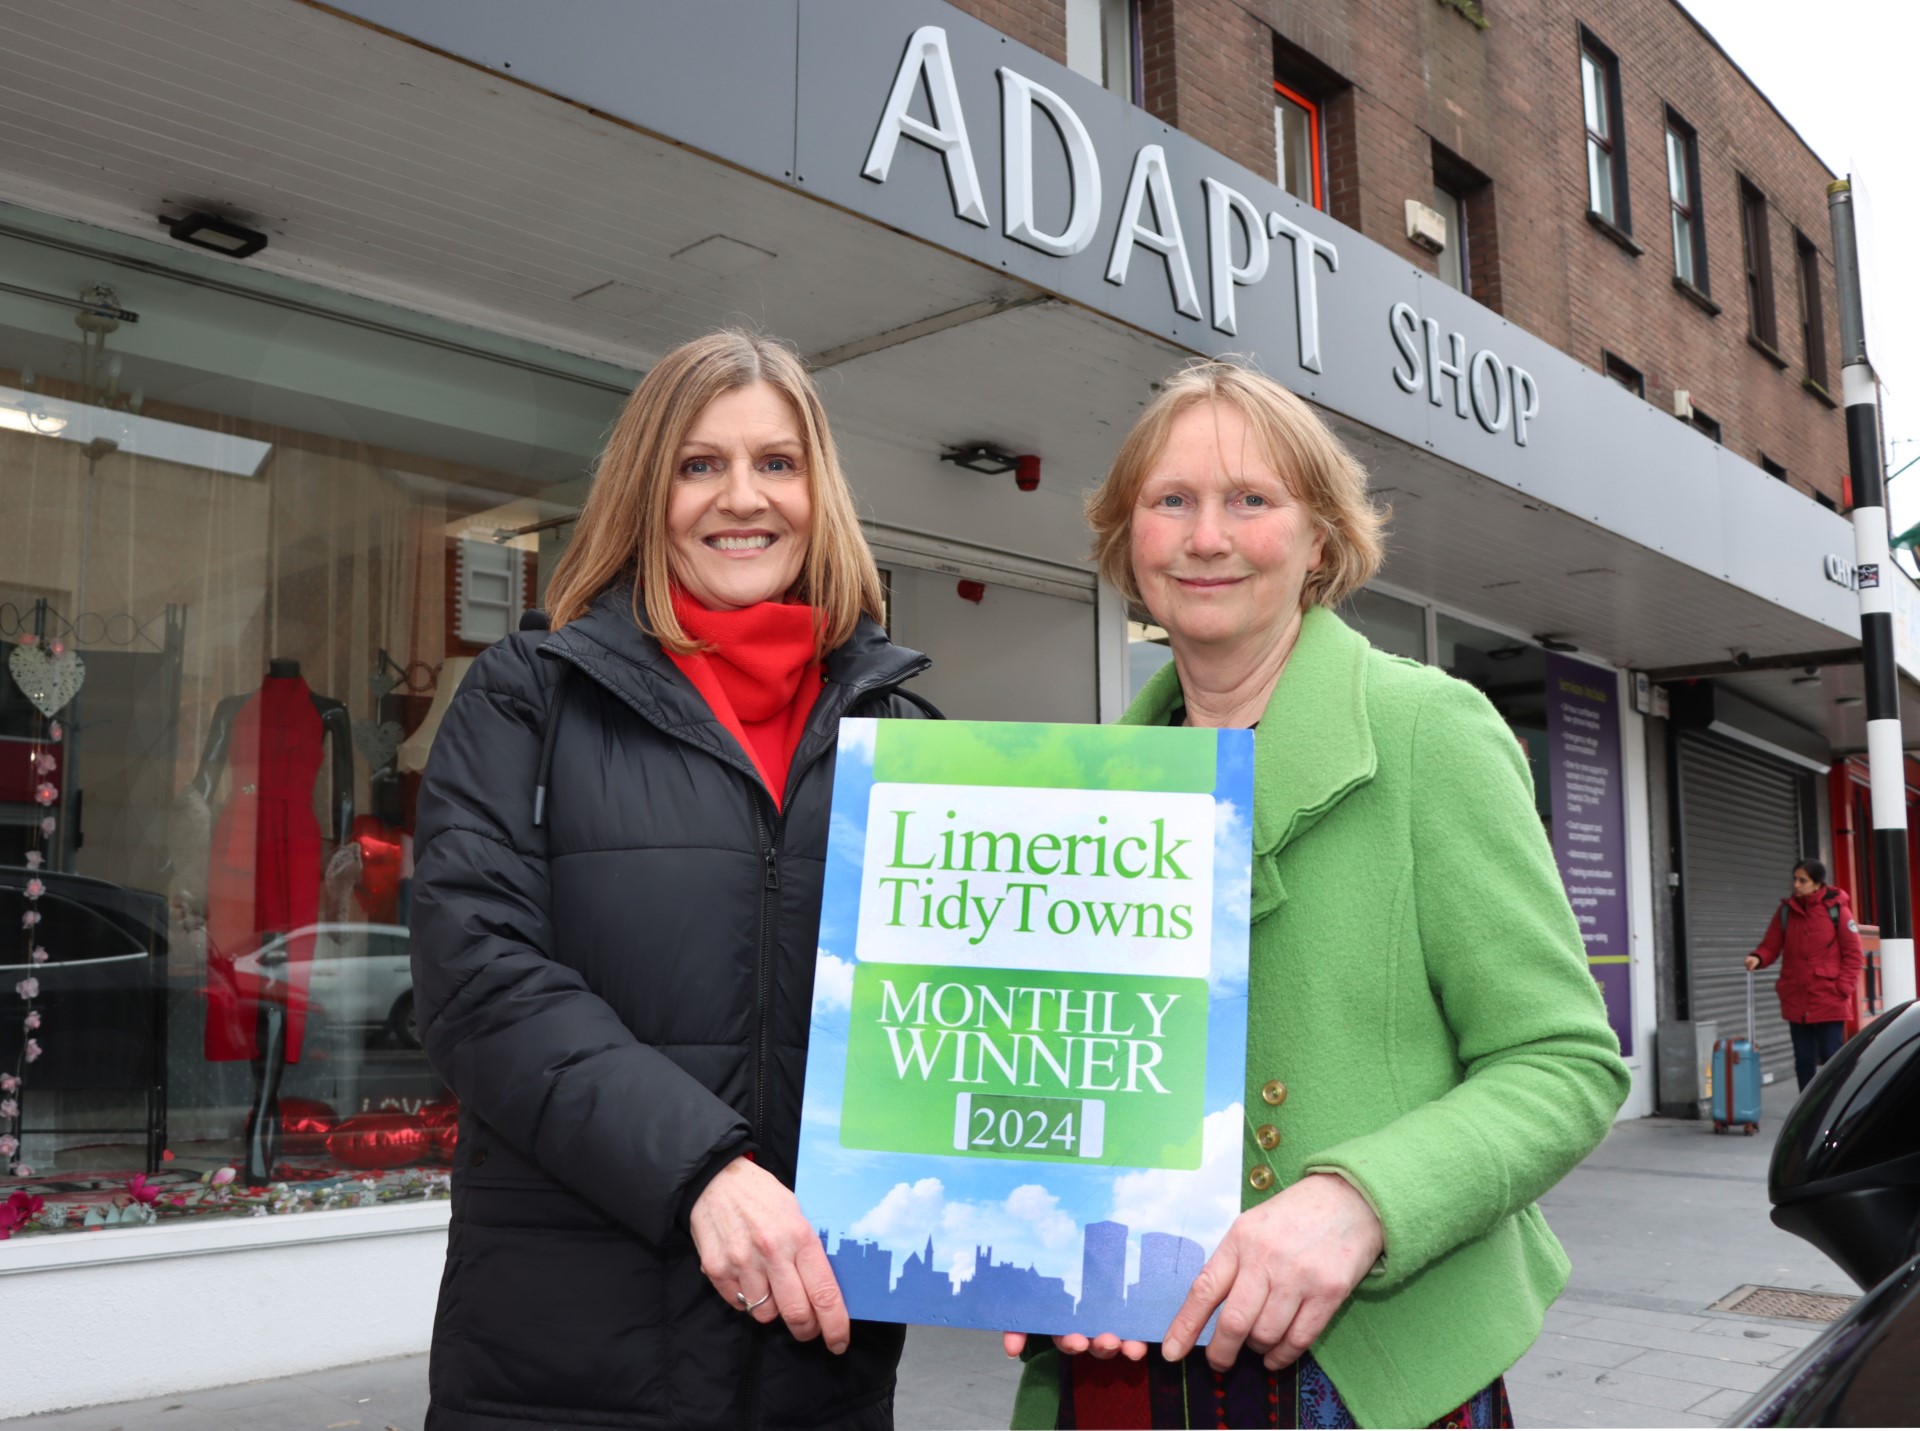 Limerick City Tidy Towns Bi-Monthly Award for January-February 2024 goes to the Adapt Charity Shop on Parnell Street